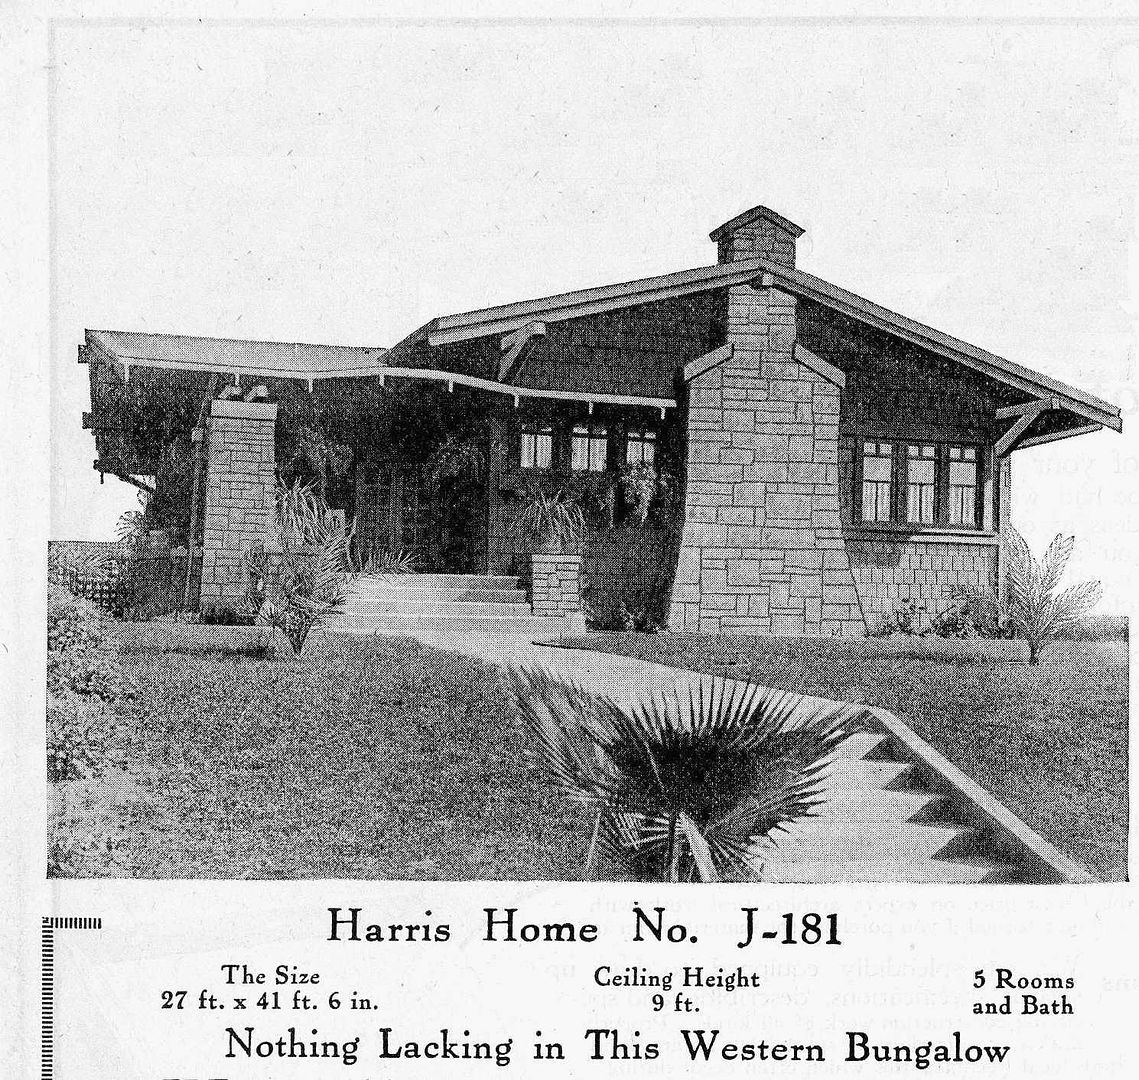 Pat also found a house by Harris Brothers (a competitor of Sears). The J-181 was a very popular house for Harris Brothers.